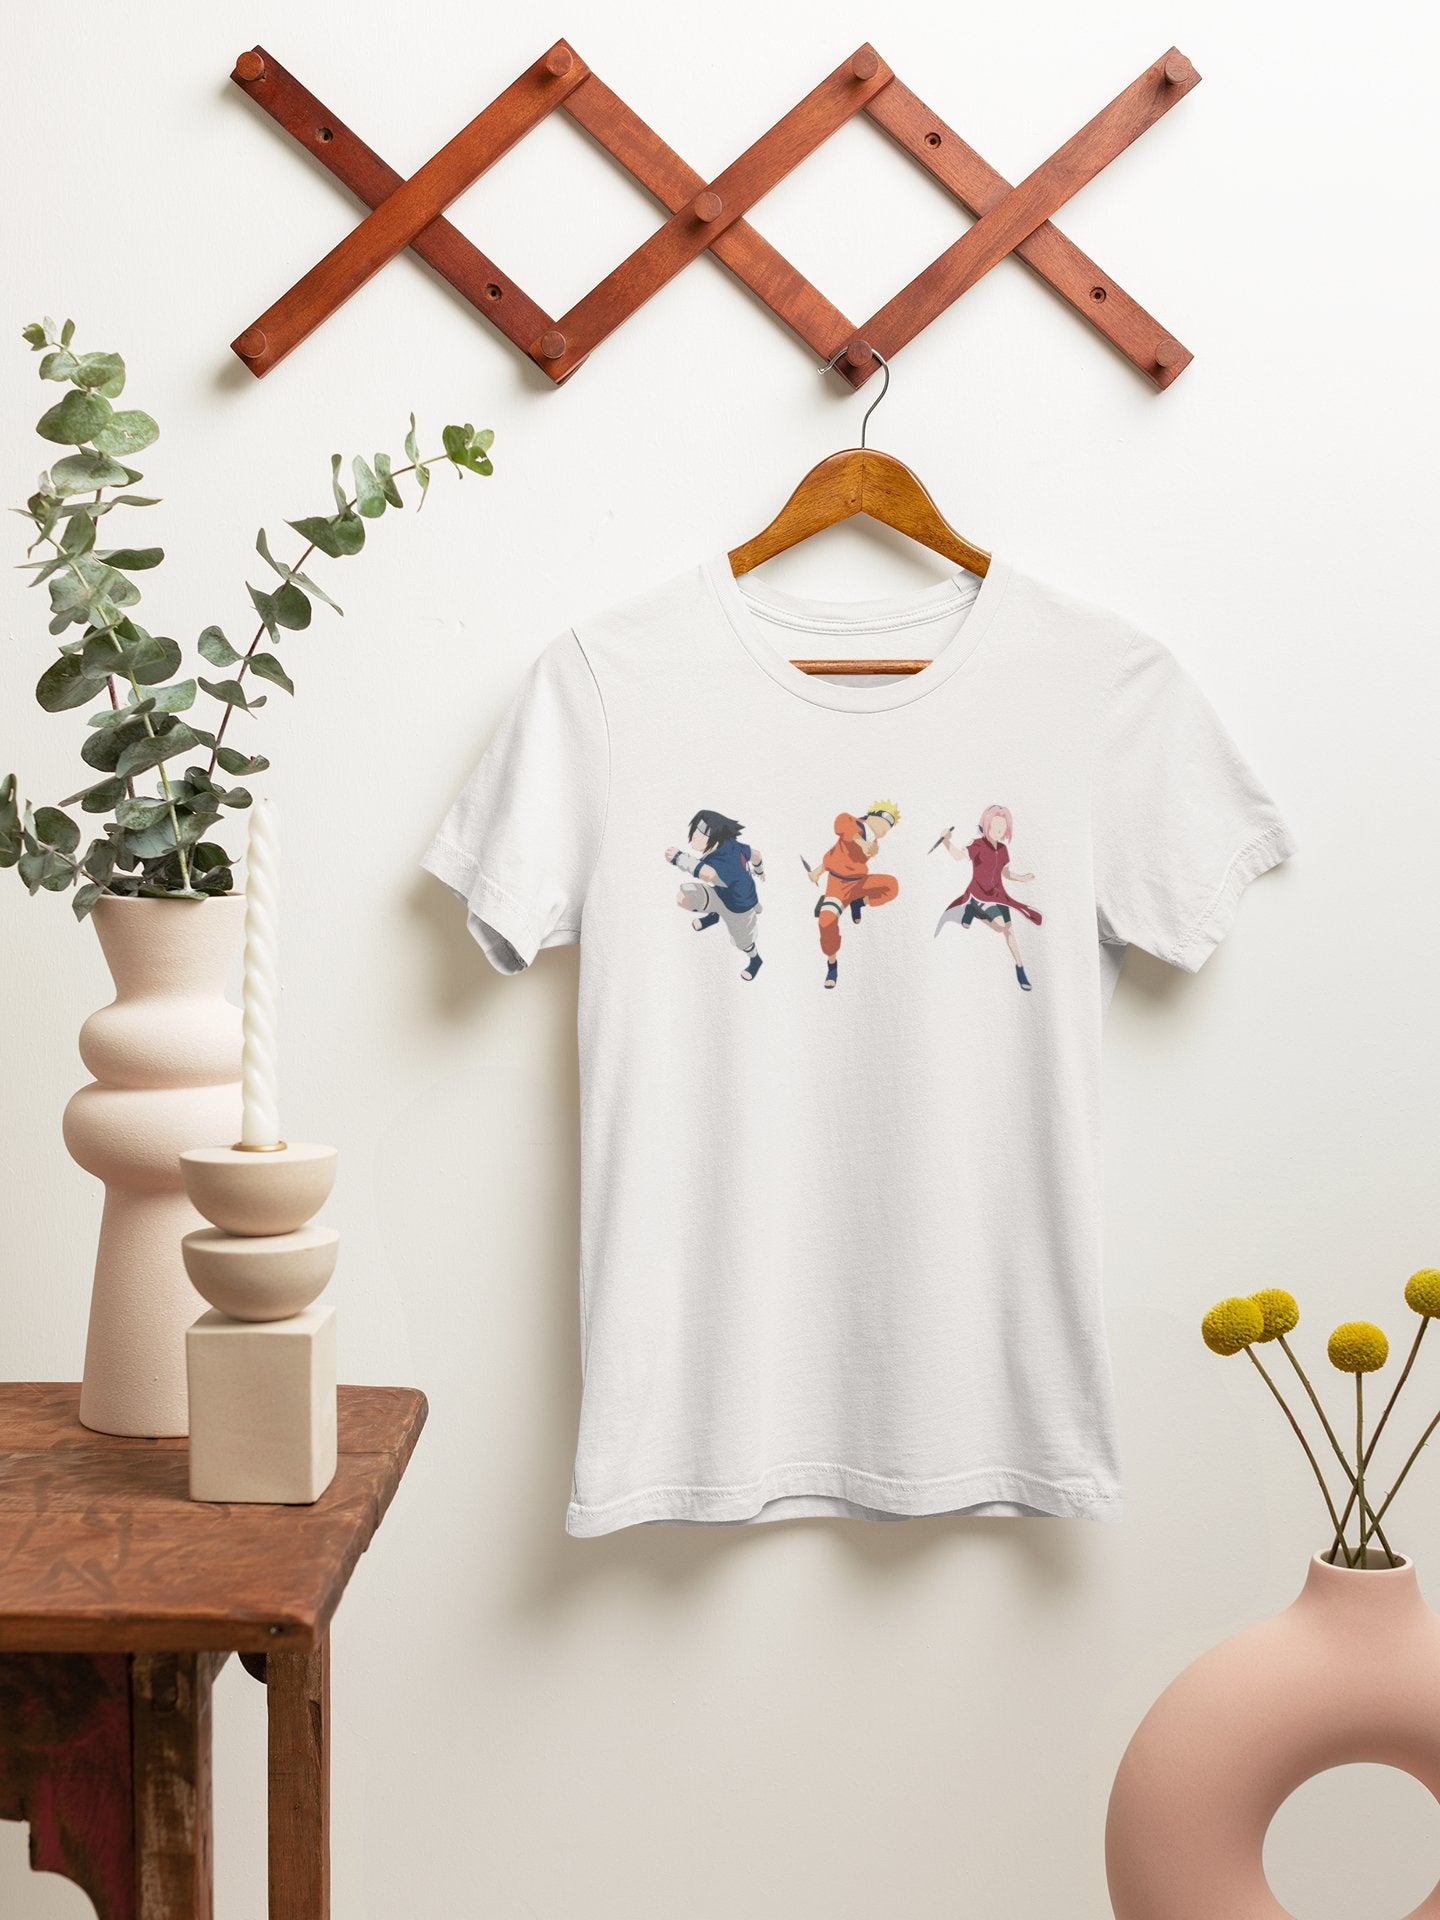 Squad 7 Naruto Anime Shirt - One Punch Fits